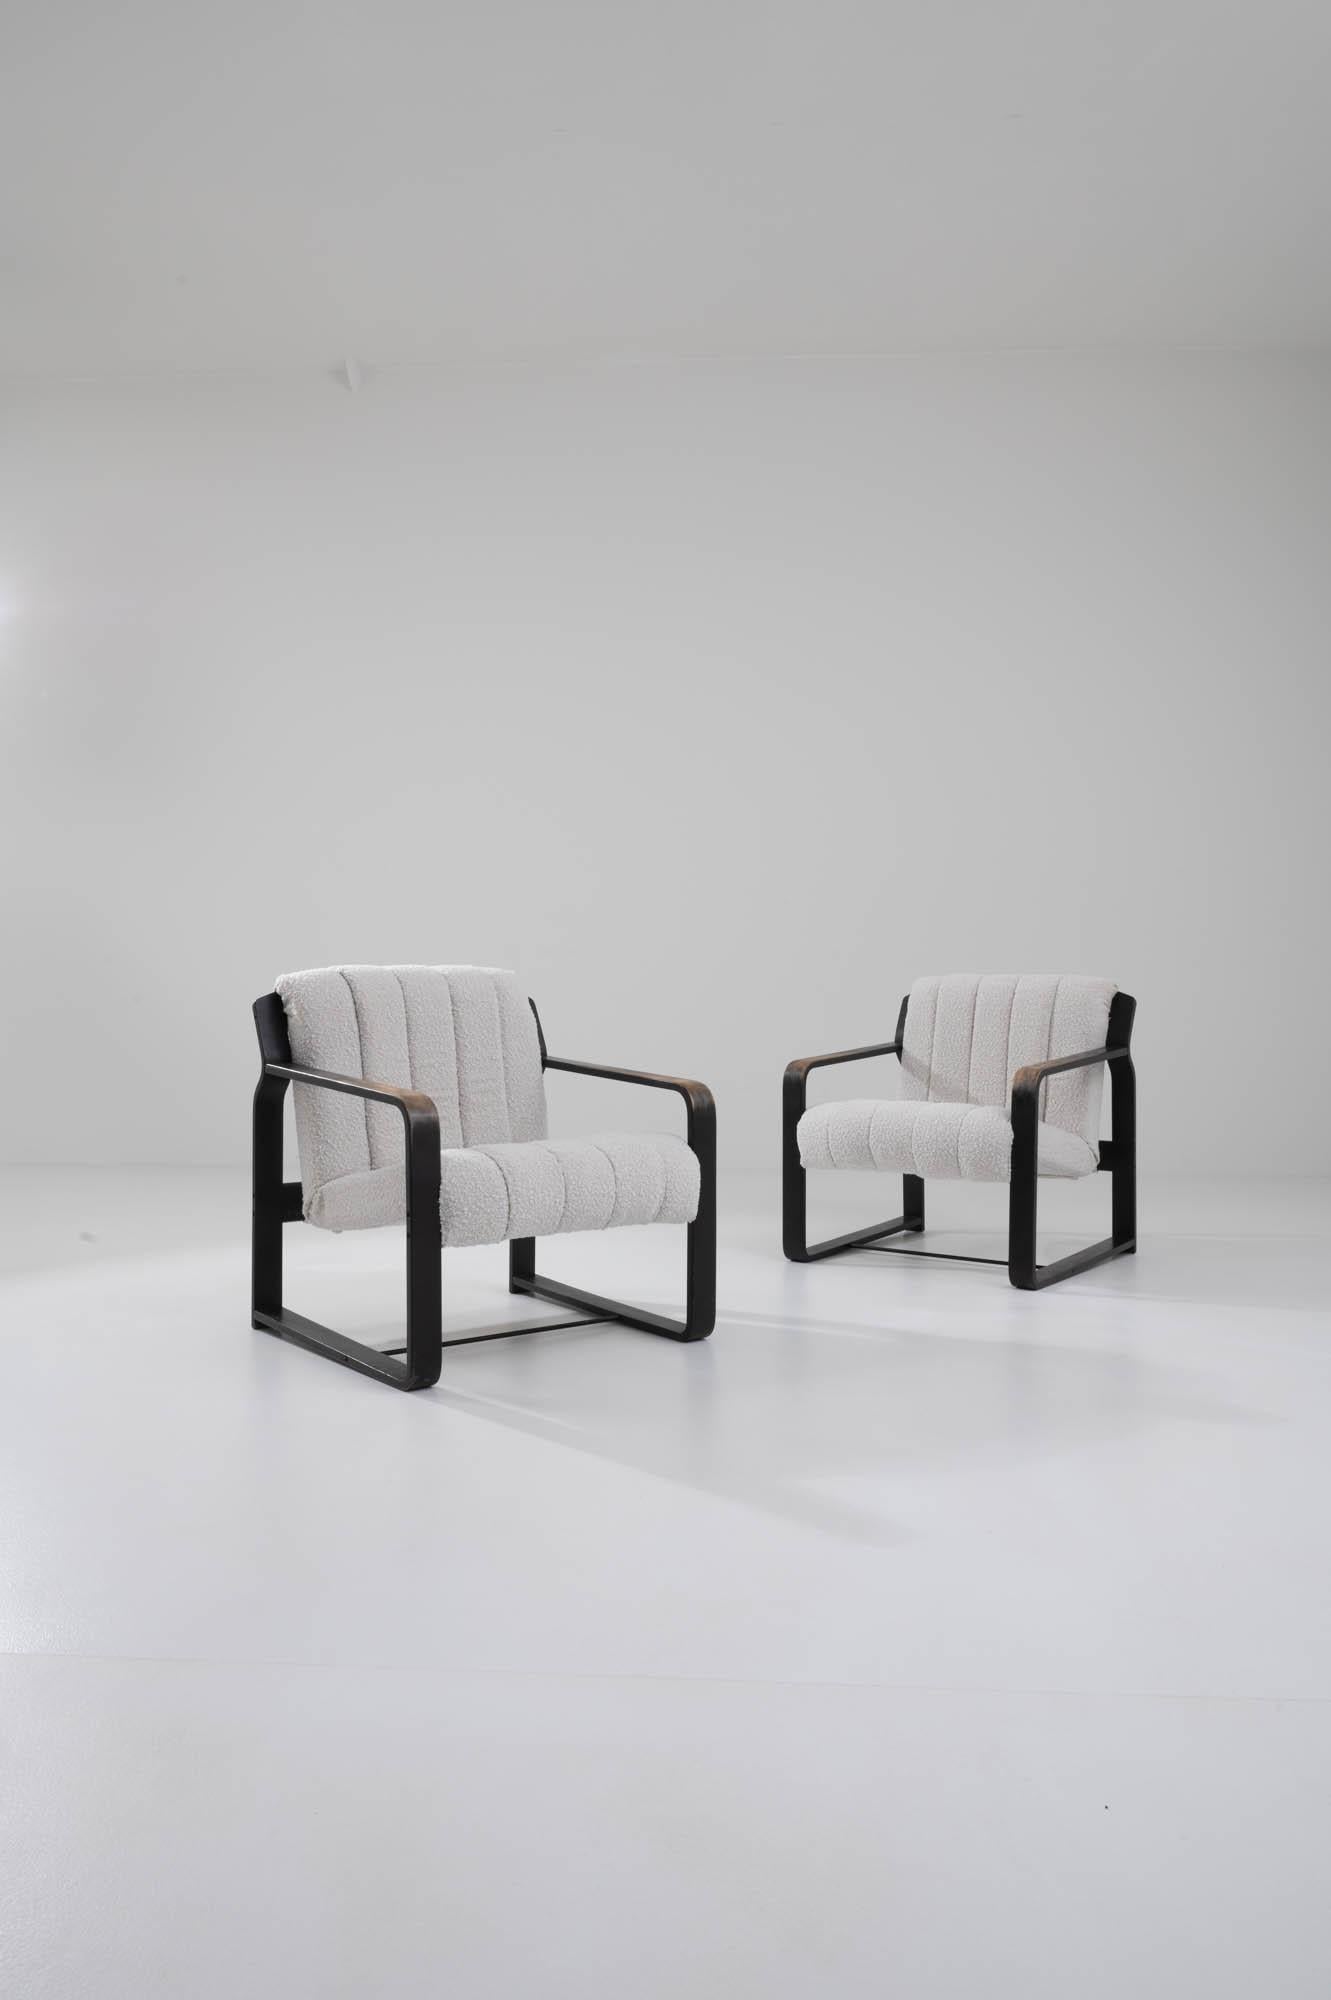 Effortlessly combining style and comfort, this pair of Mid Century Modern armchairs are a covetable find. Produced in the 1960s in the former Czechoslovakia, the design is attributed to Ludvik Volak, an architect and furniture designer known for his